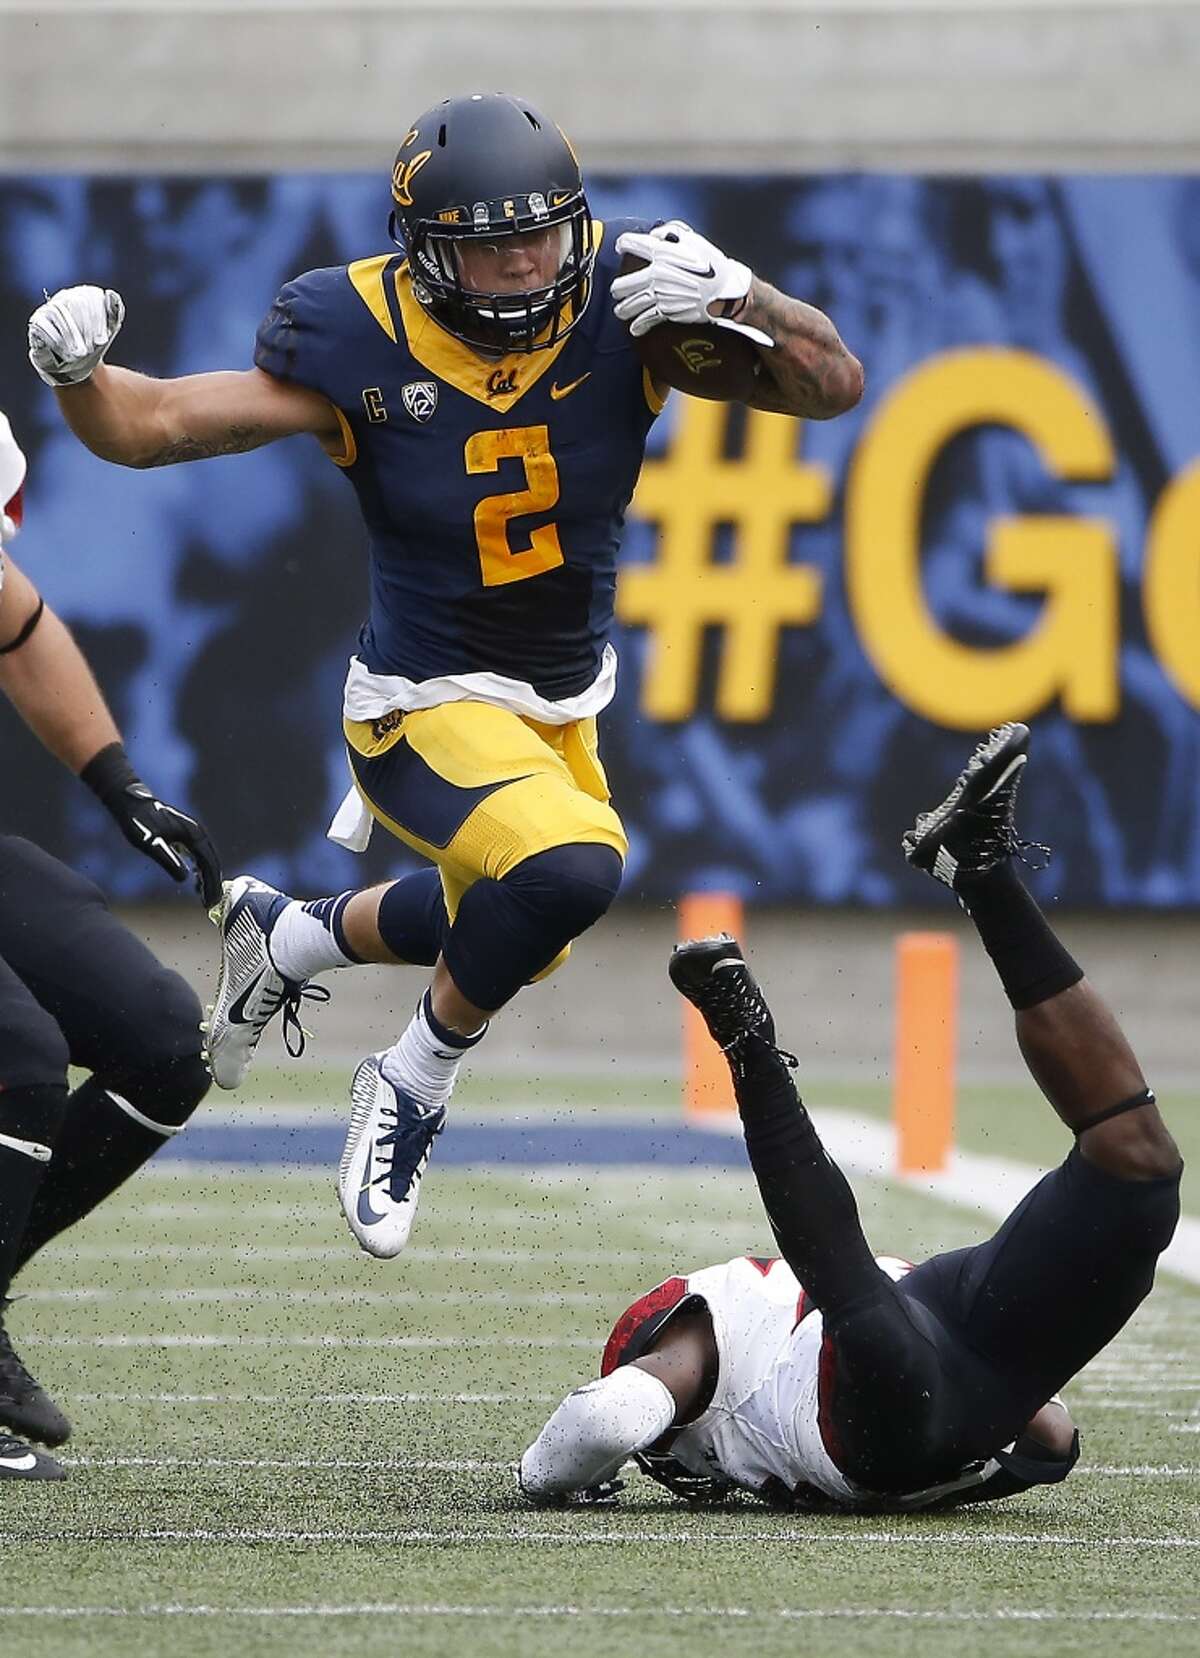 Daniel Lasco, RB, California Lasco, who starred at The Woodlands in high school, had 19 carries for 128 yards and a touchdown as the Golden Bears defeated San Diego State 35-7. Lasco and company will head to the Lone Star state this weekend to take on the Longhorns.